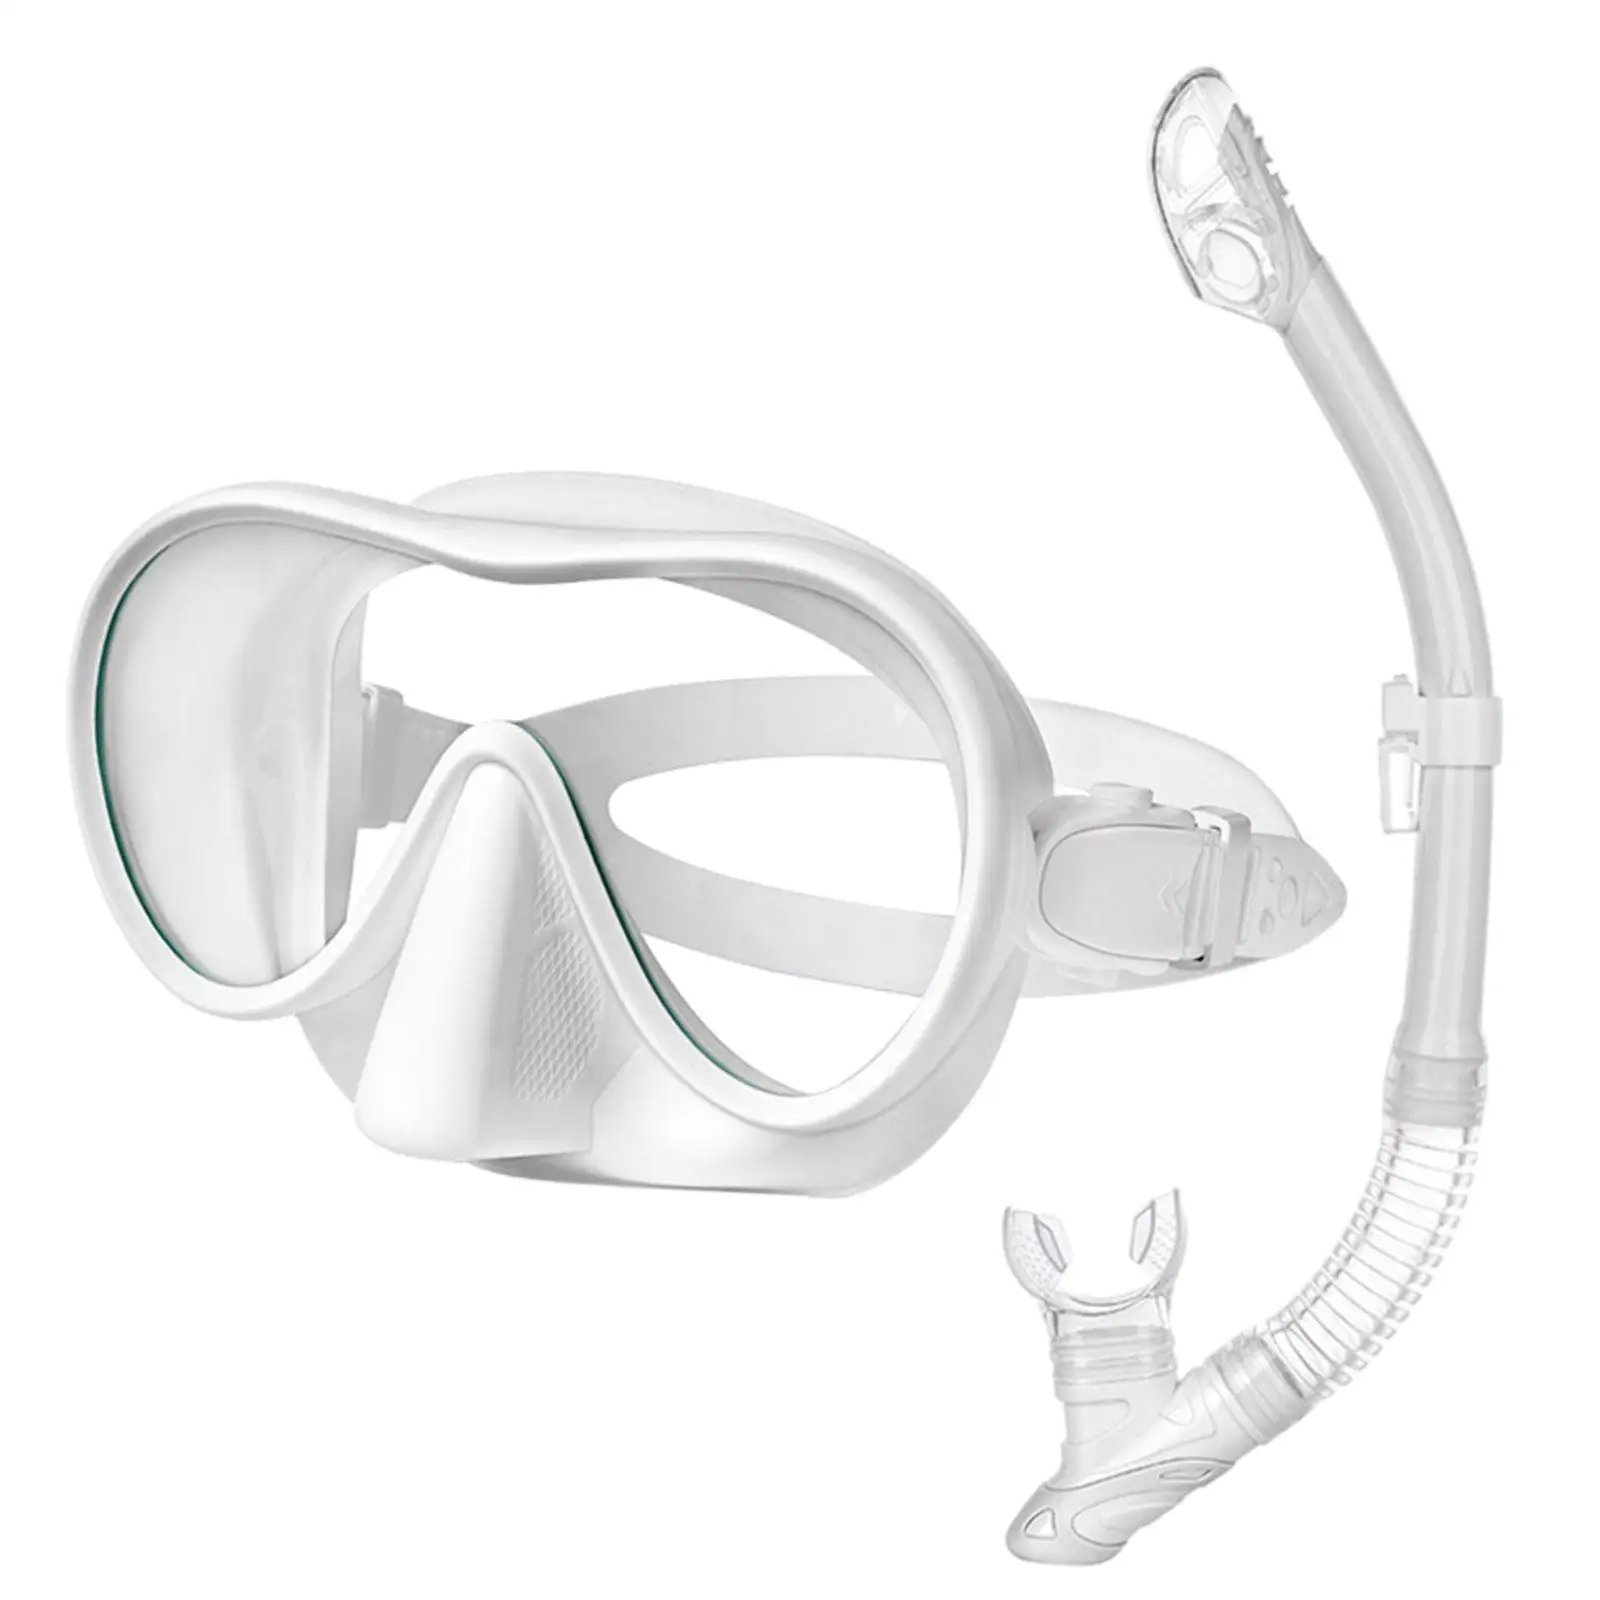 Snorkel Set Swim Goggles, Breathing Snorkel Mask, Adult Wide View Diving Mask Goggles for Scuba Diving